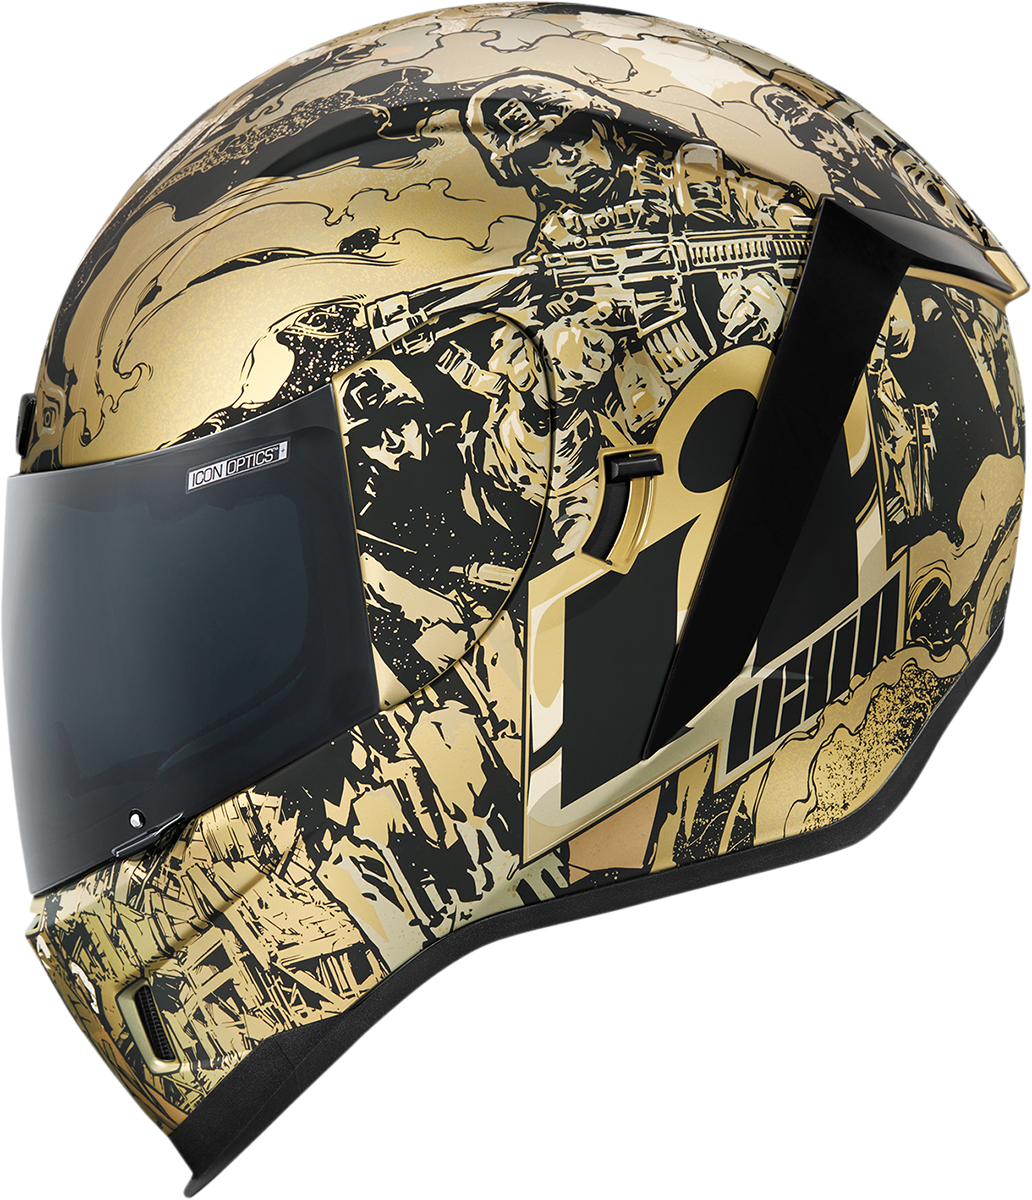 ICON Airform™ Helmet - Guardian - Gold - Large 0101-13694